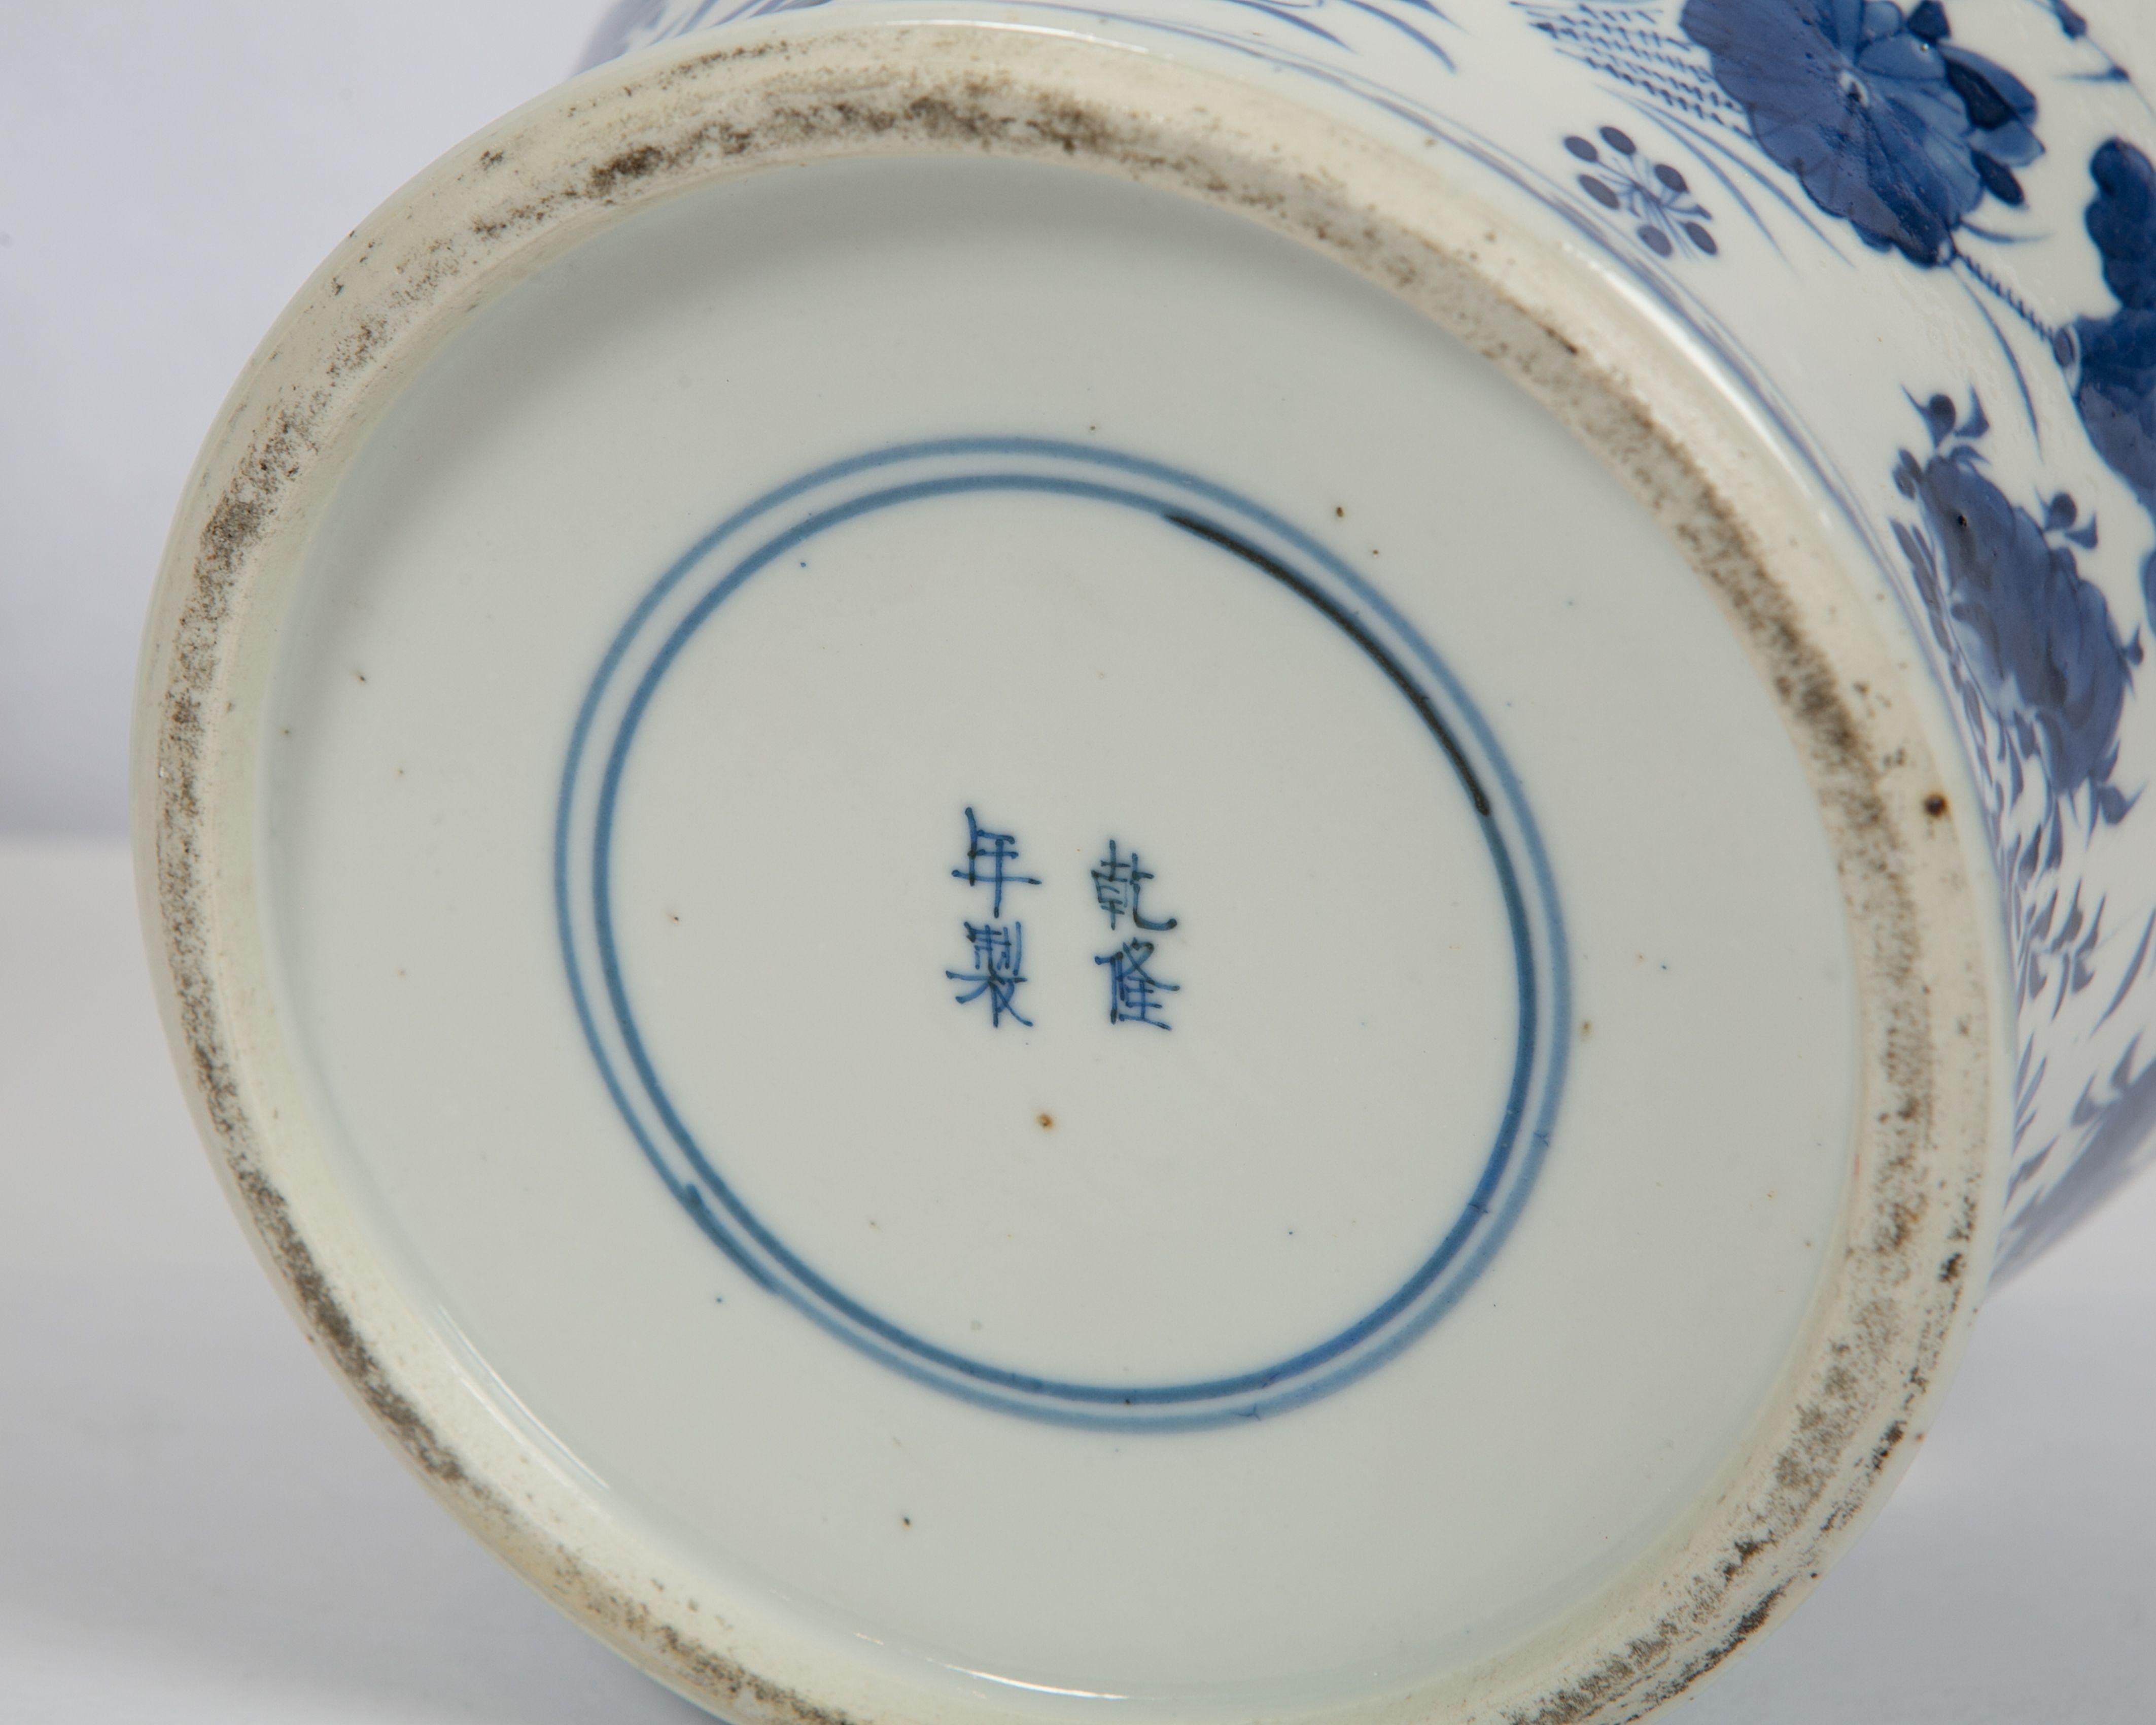 Pair of Chinese Porcelain Blue and White Covered Jars 19th Century Qing Dynasty 1